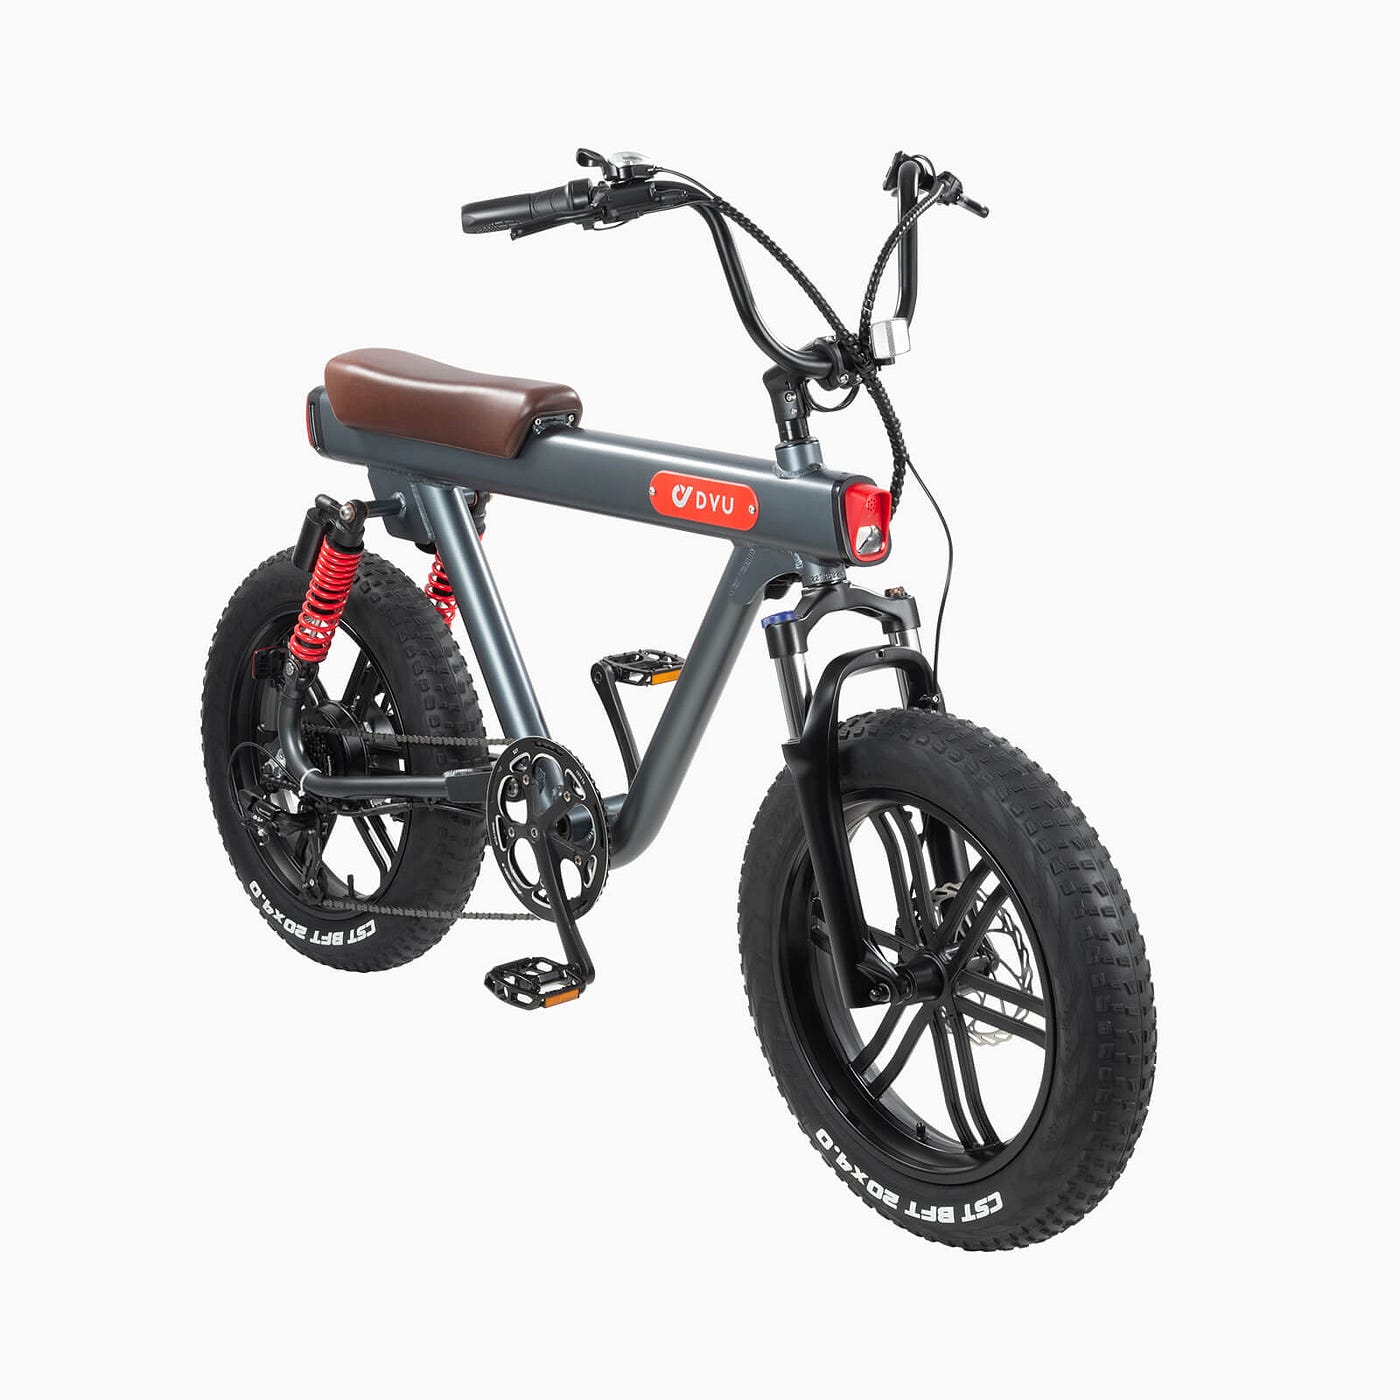 Simplifying Urban Travel with Stylish and Functional Electric City Bikes near Me for Sale by Archtrashcans Sep, 2023 Medium